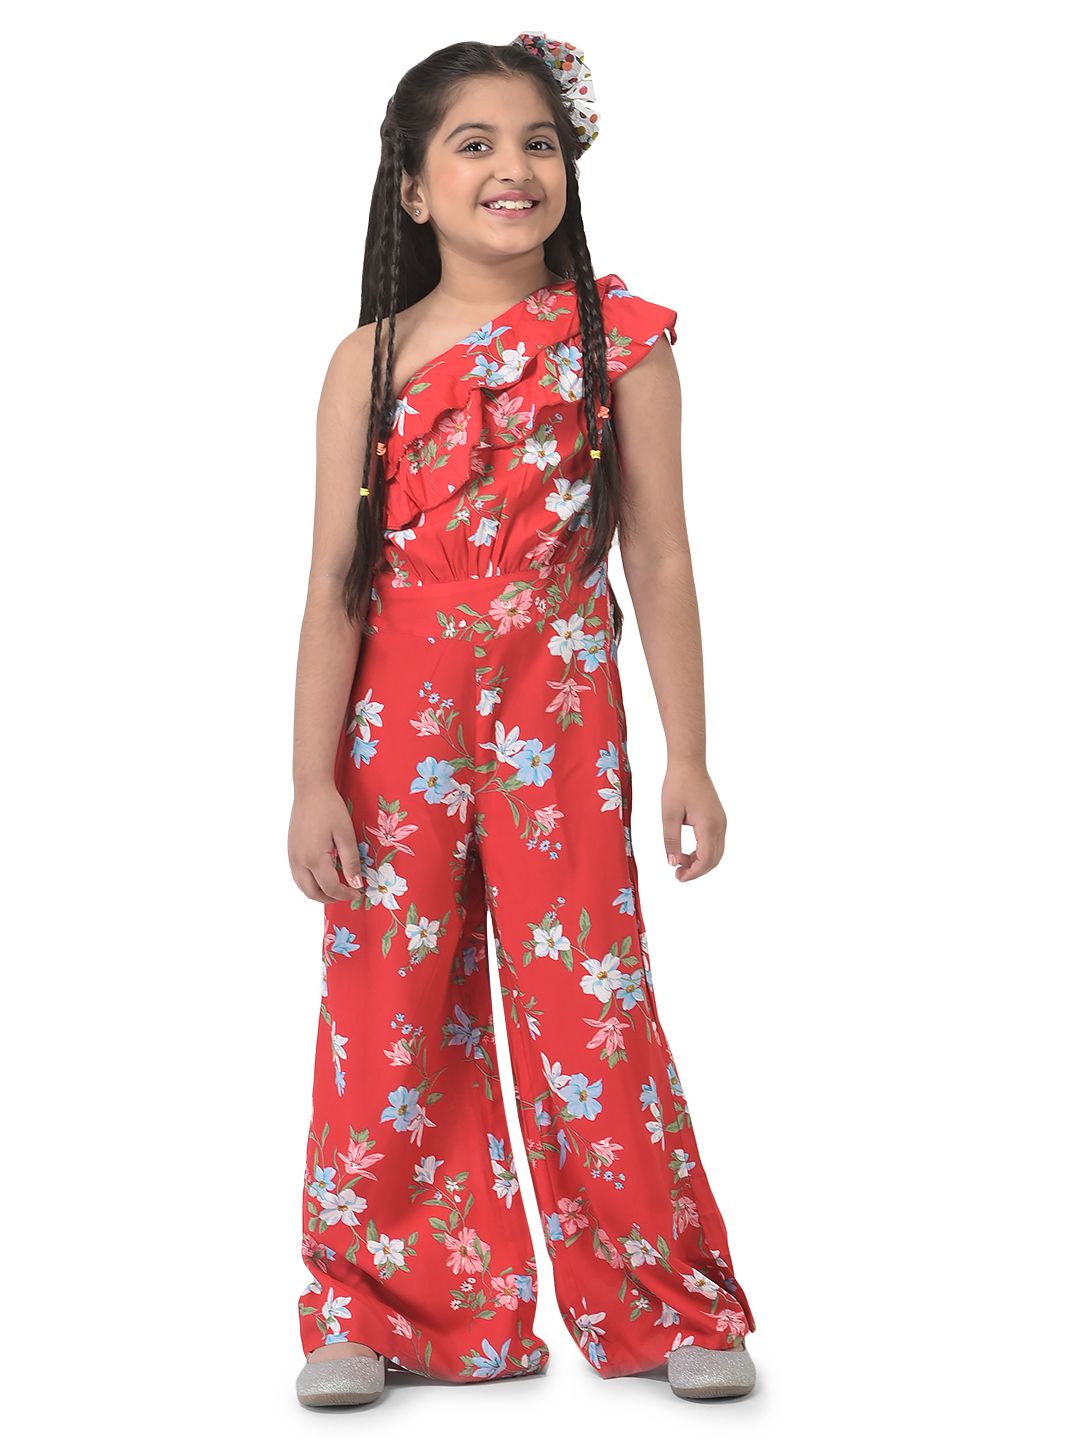 Buy Jumpsuit For Kids 7 Years Old online | Lazada.com.ph-nttc.com.vn